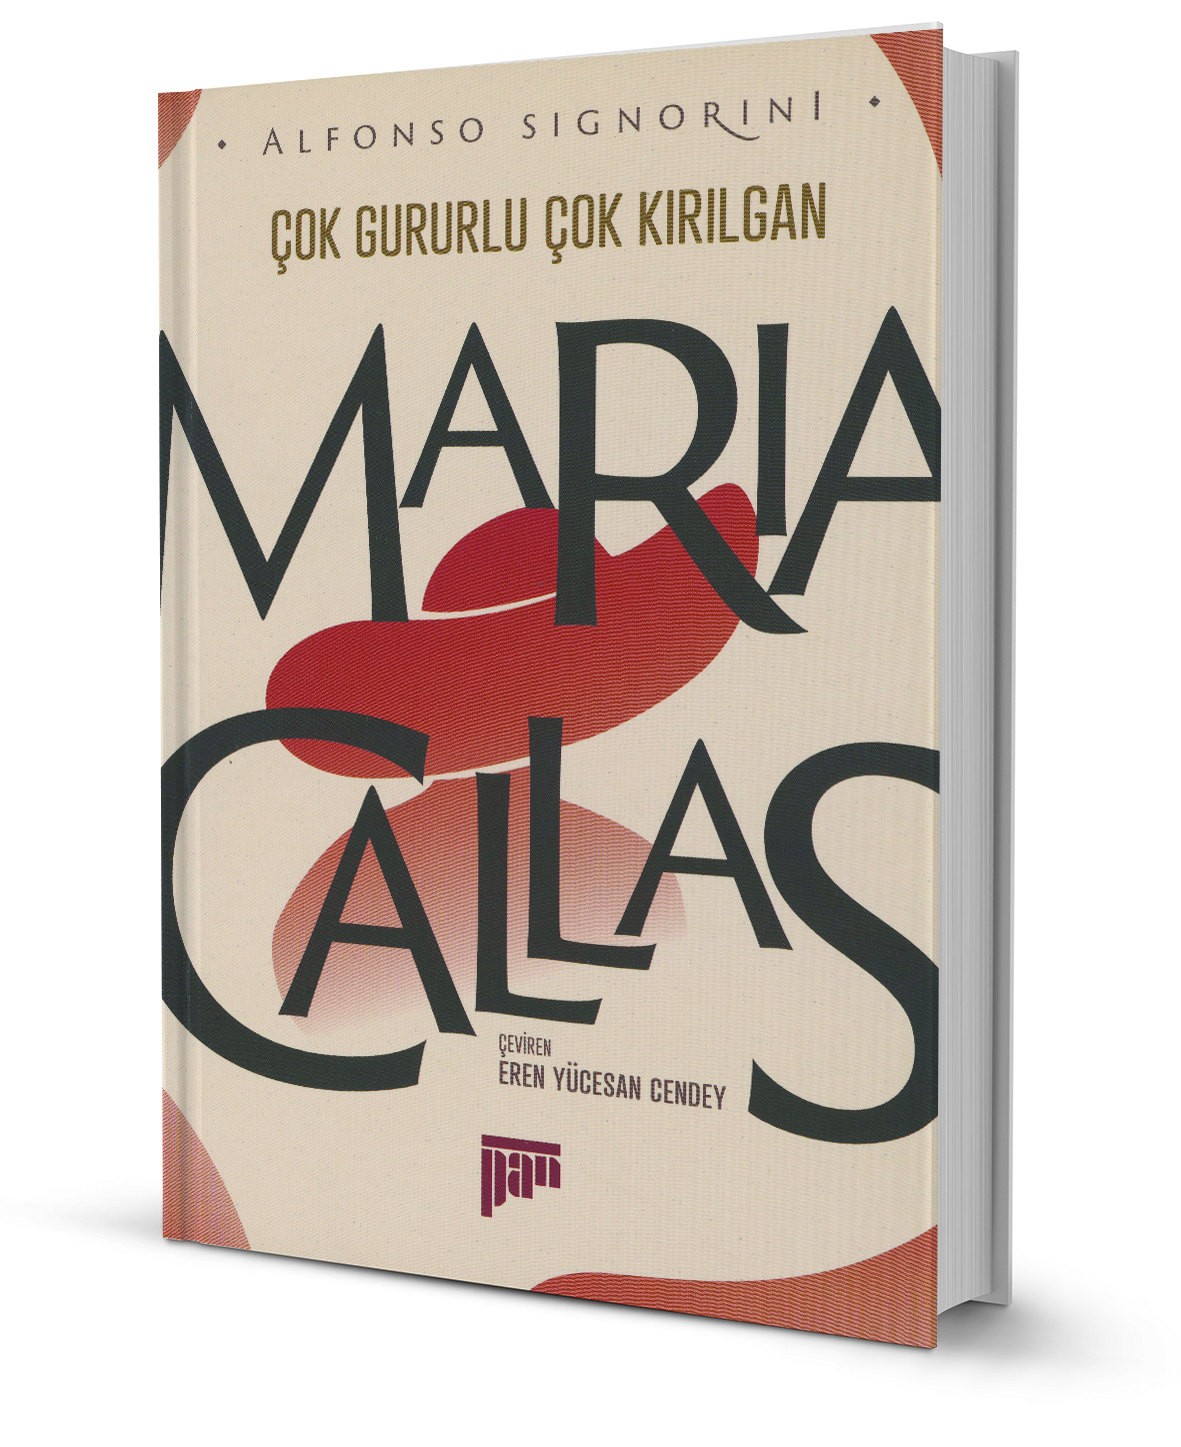 going-the-distance-for-maria-callas3